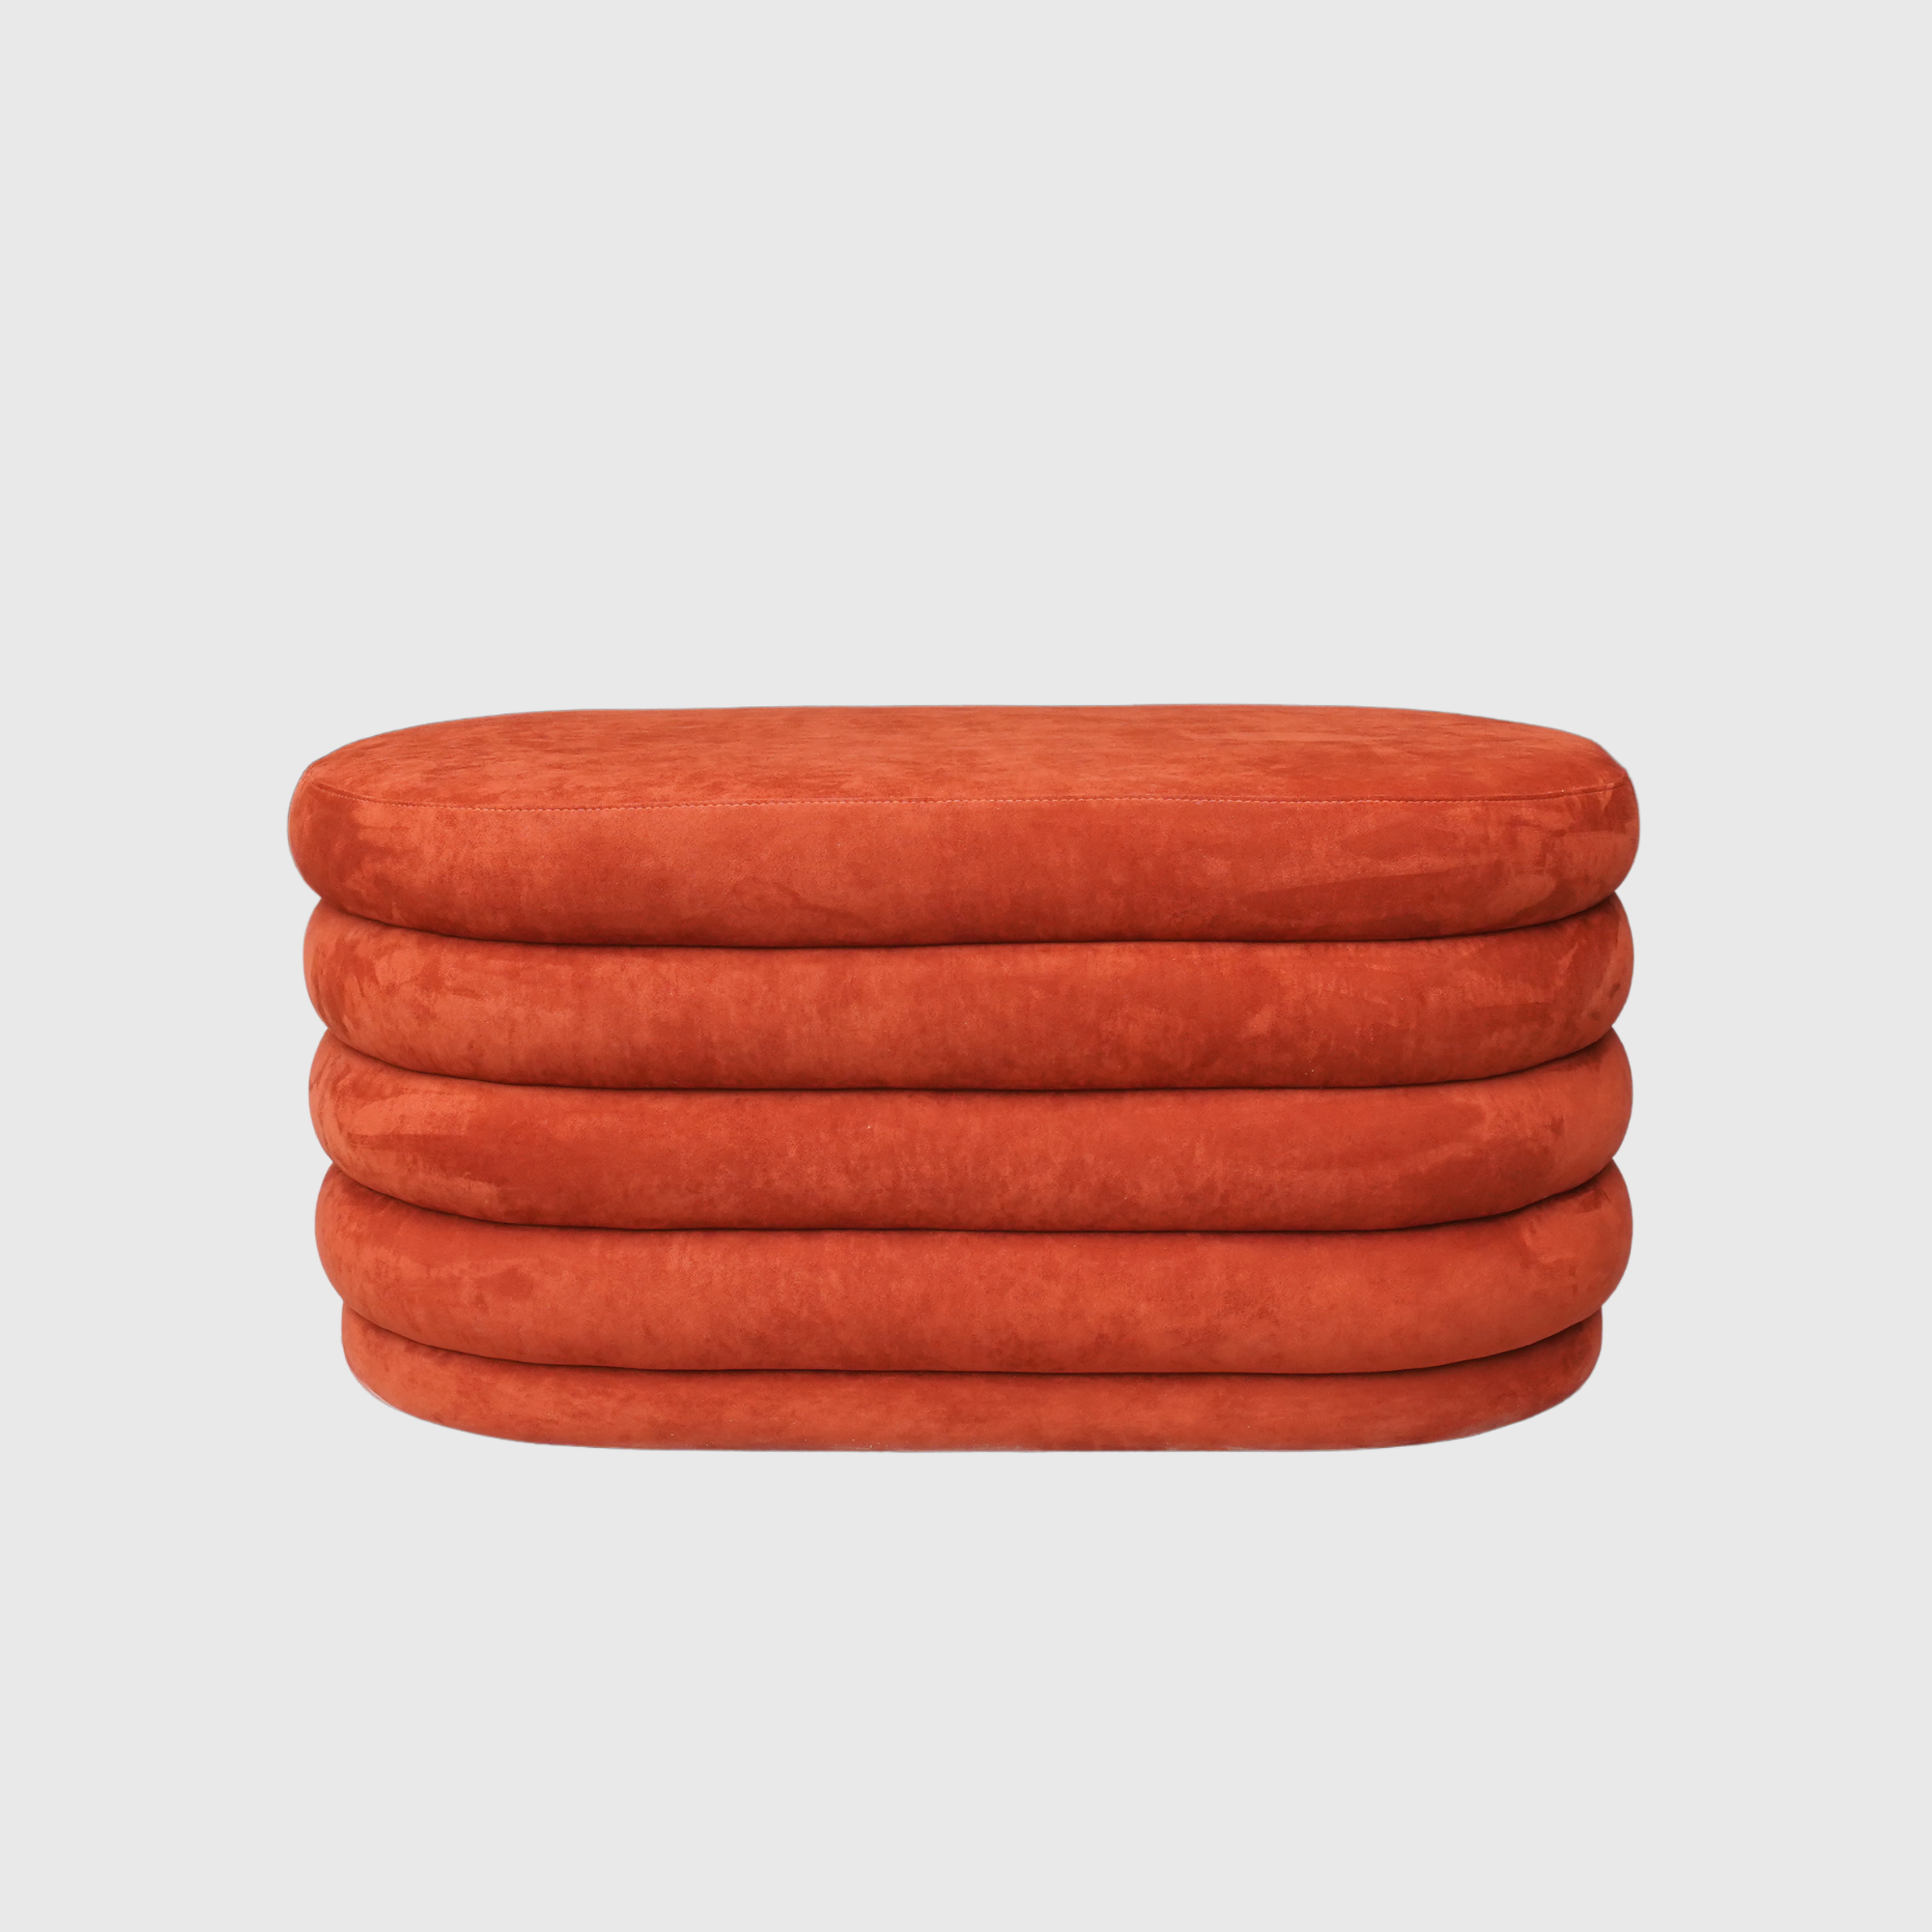 Stacked Ottoman - Large